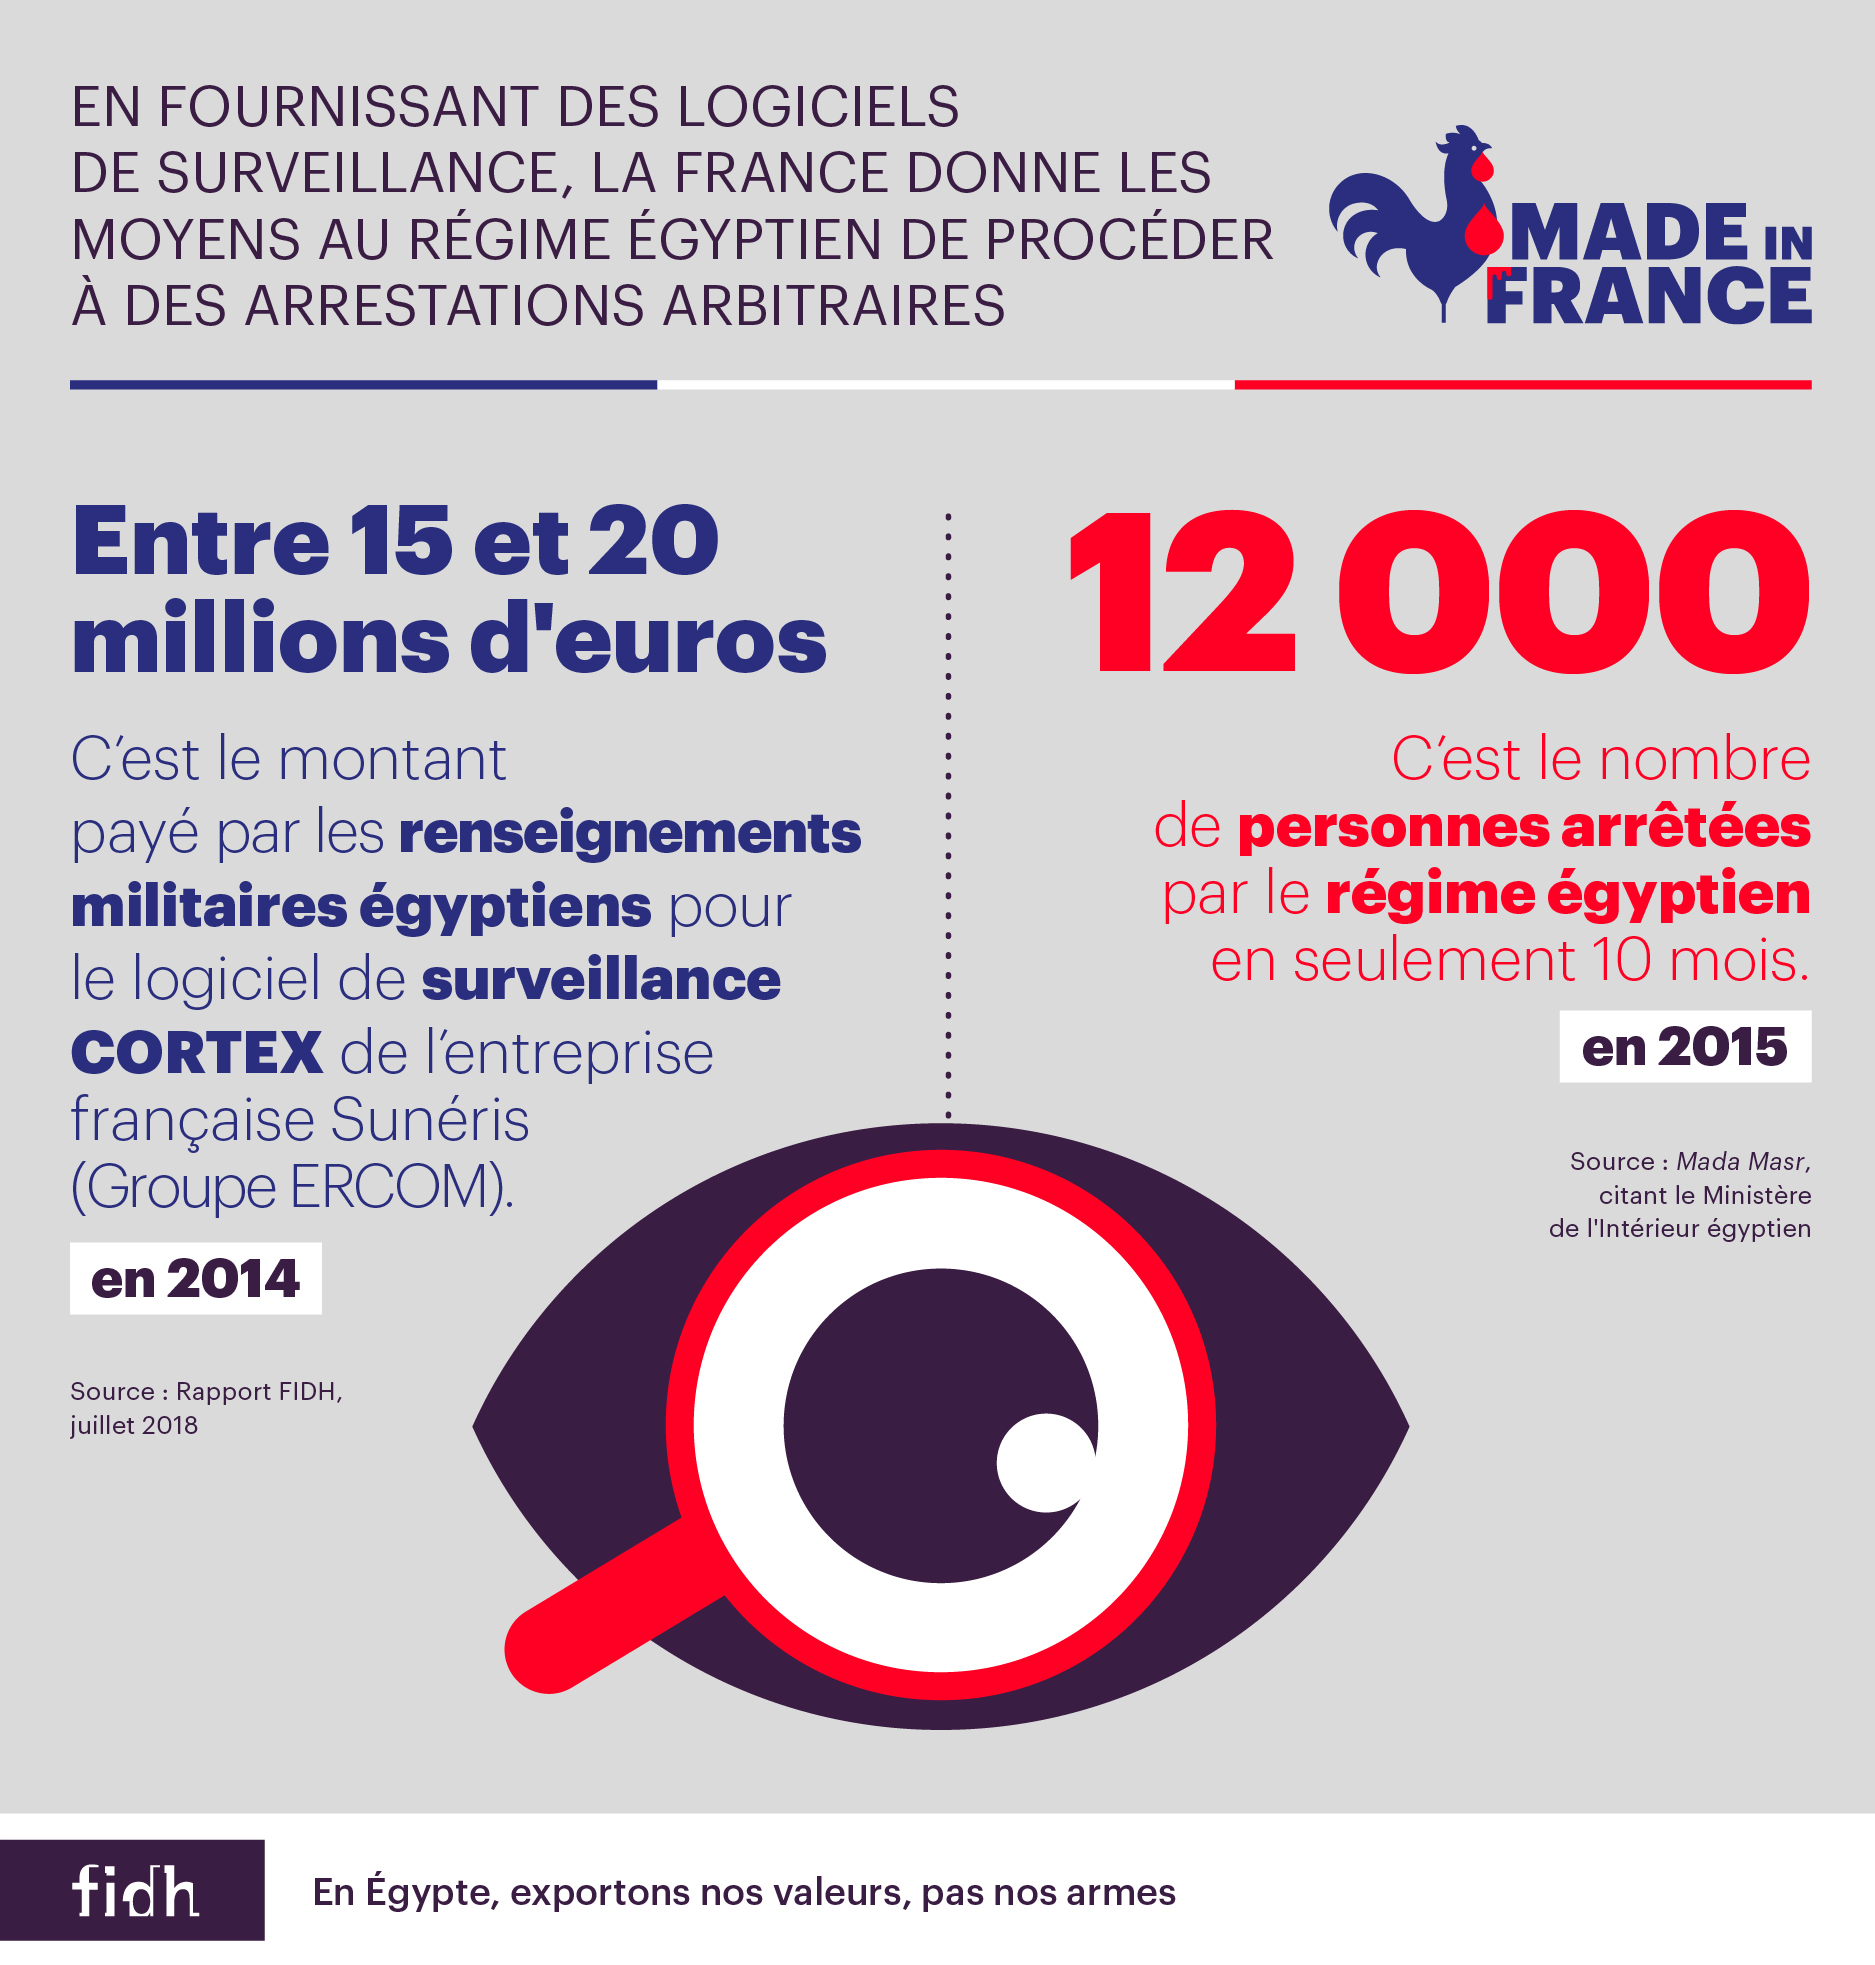 FIDH_MADEINFRANCE_03